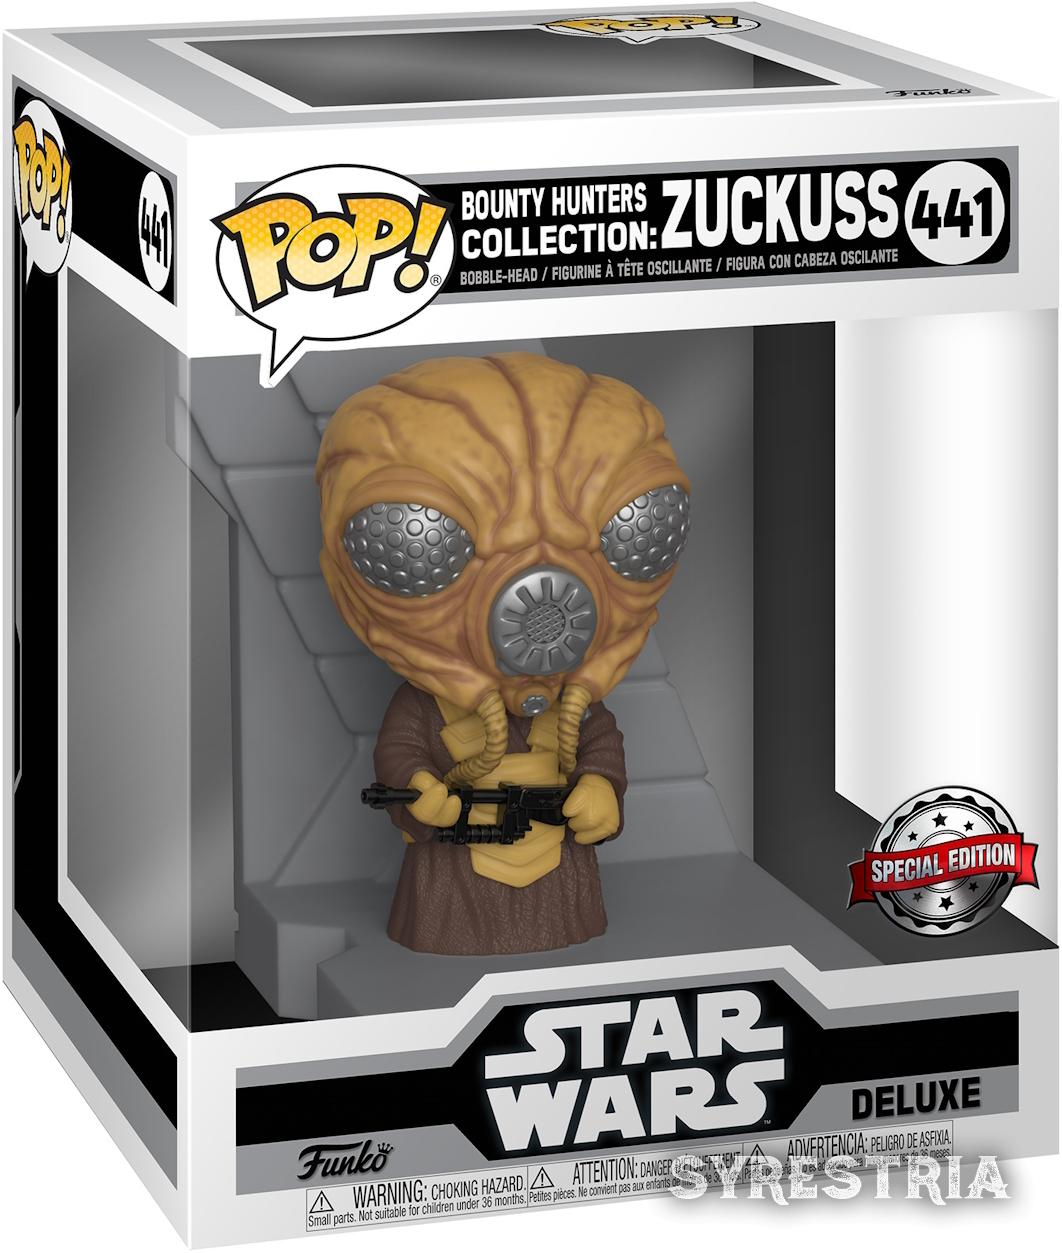 Star Wars Bounty Hunters Collection: Zuckuss 441  Special Edition - Funko Pop! Deluxe